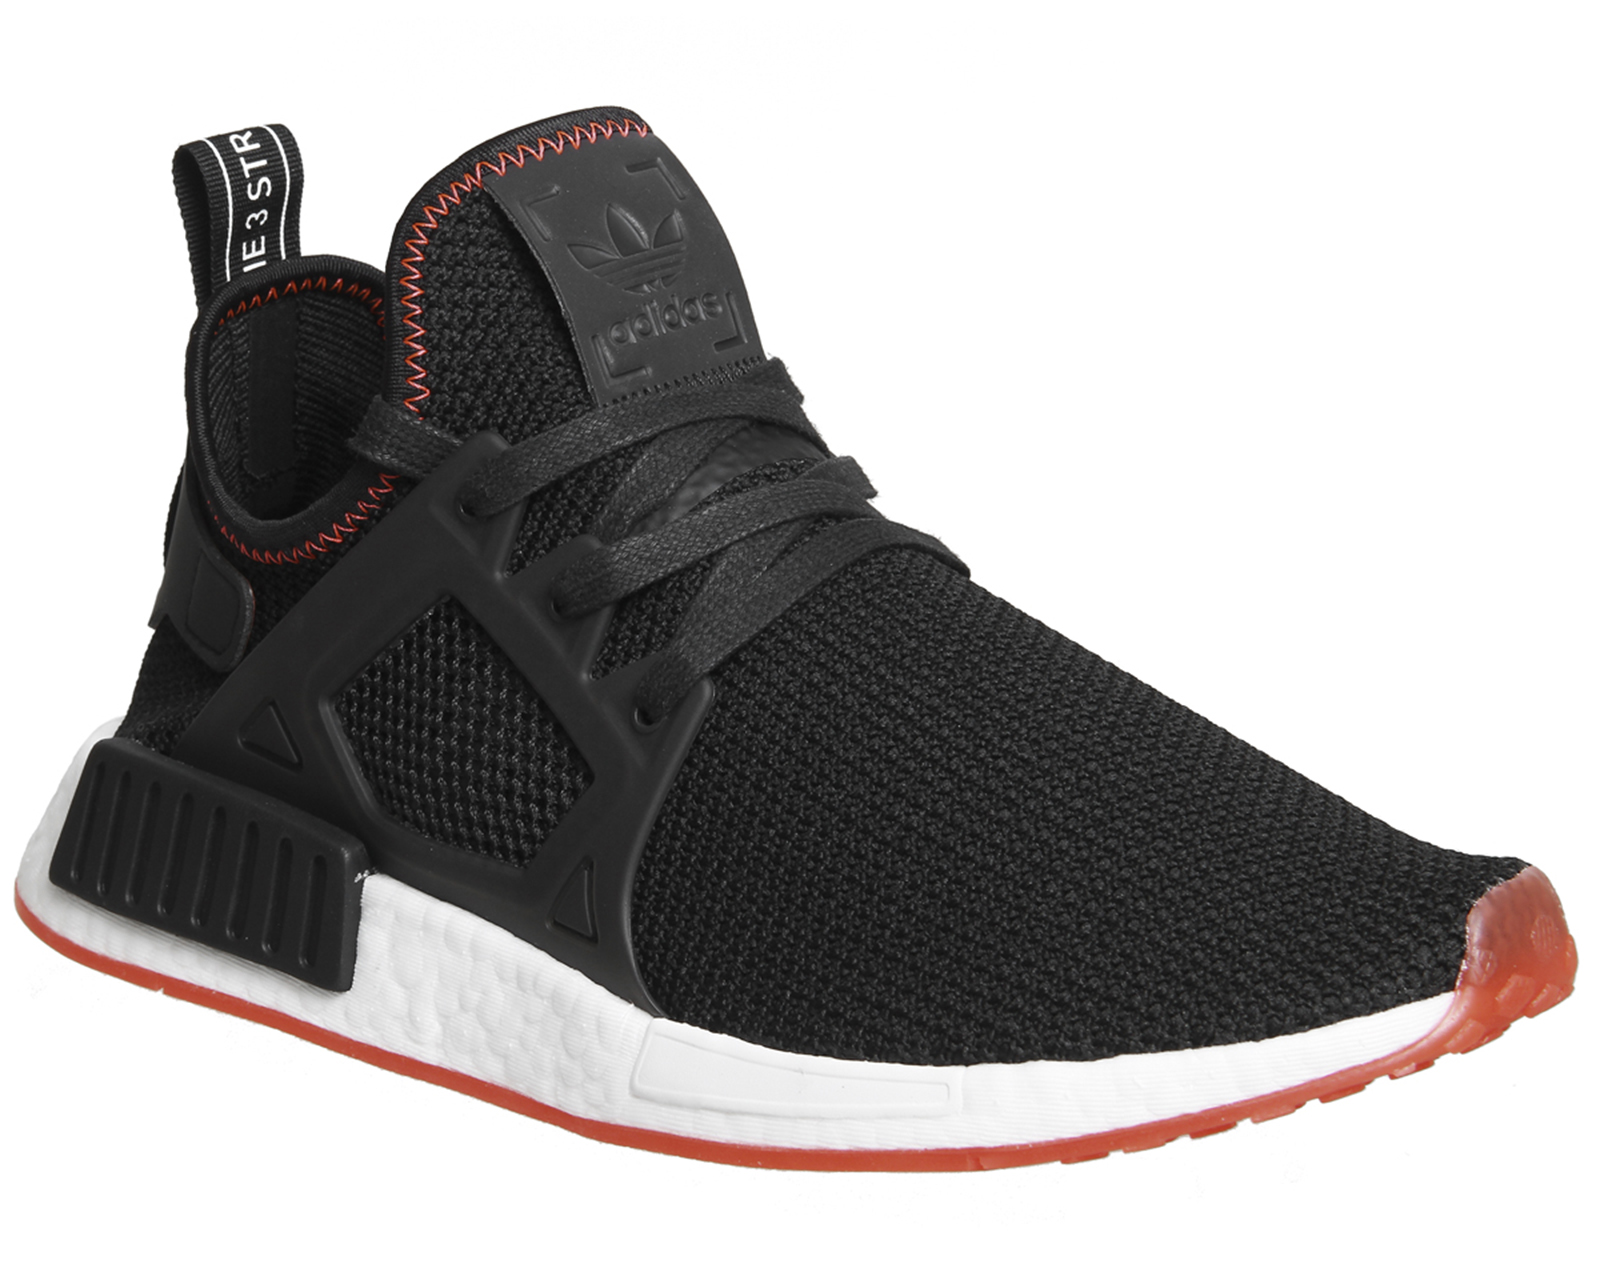 adidas Nmd Xr1 Black Black Solar Red - His trainers